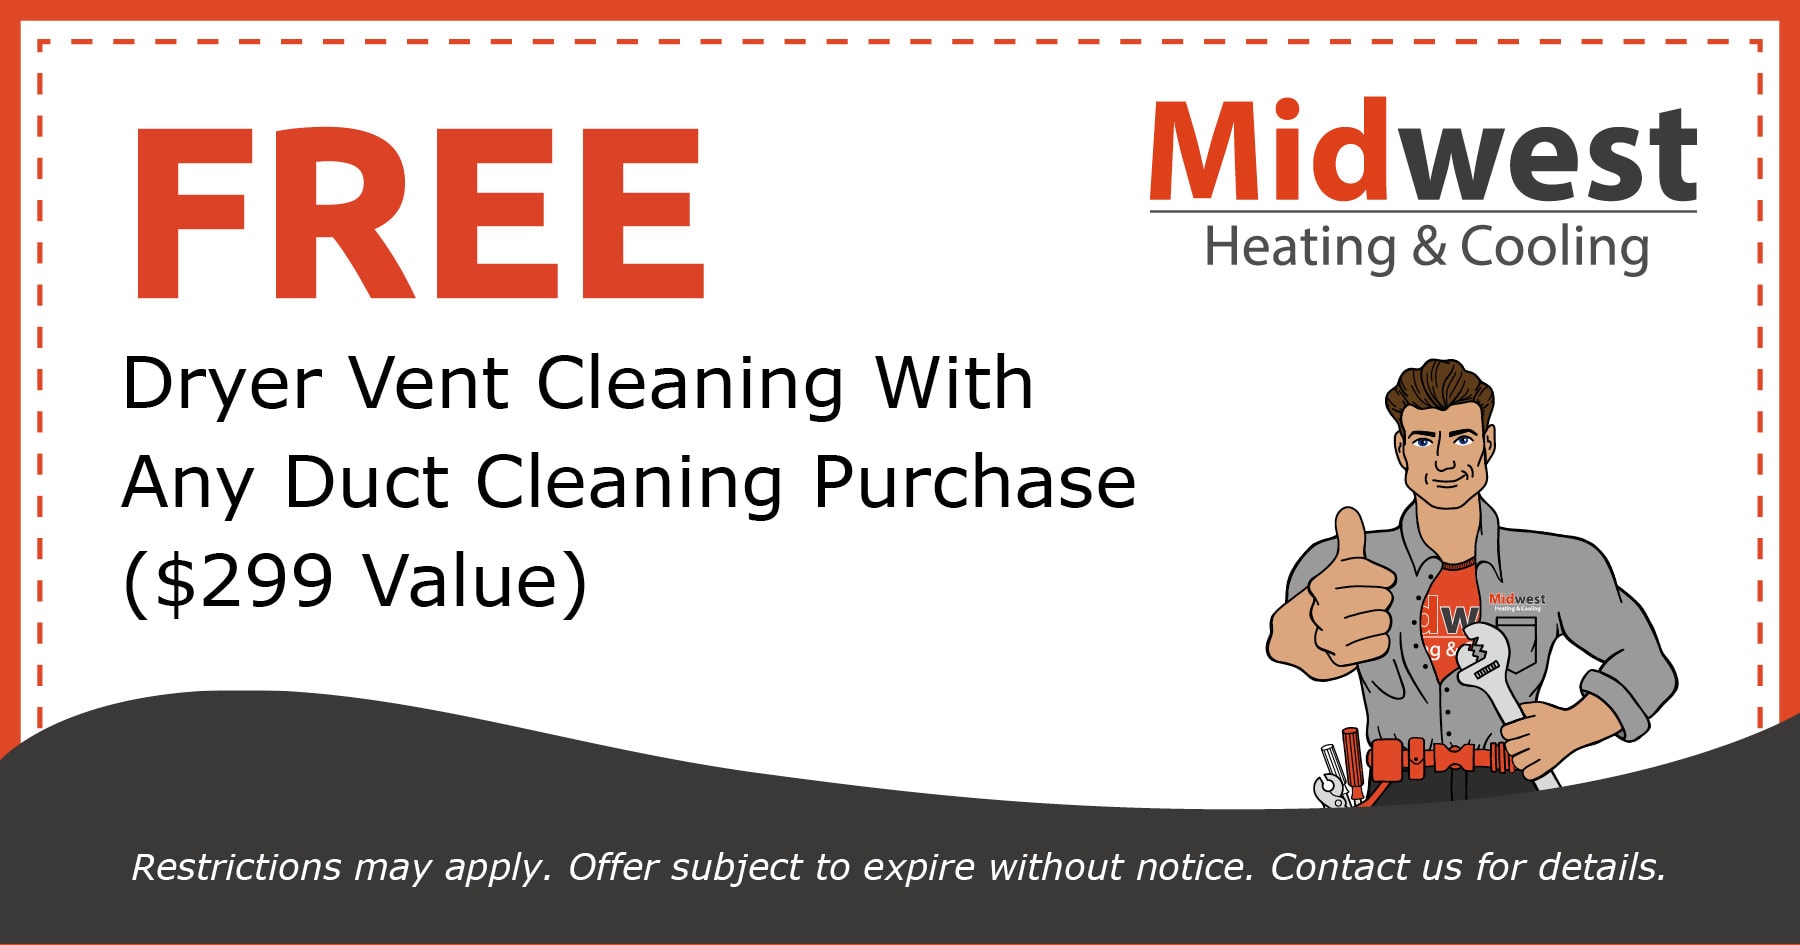 Free Dryer vent cleaning.